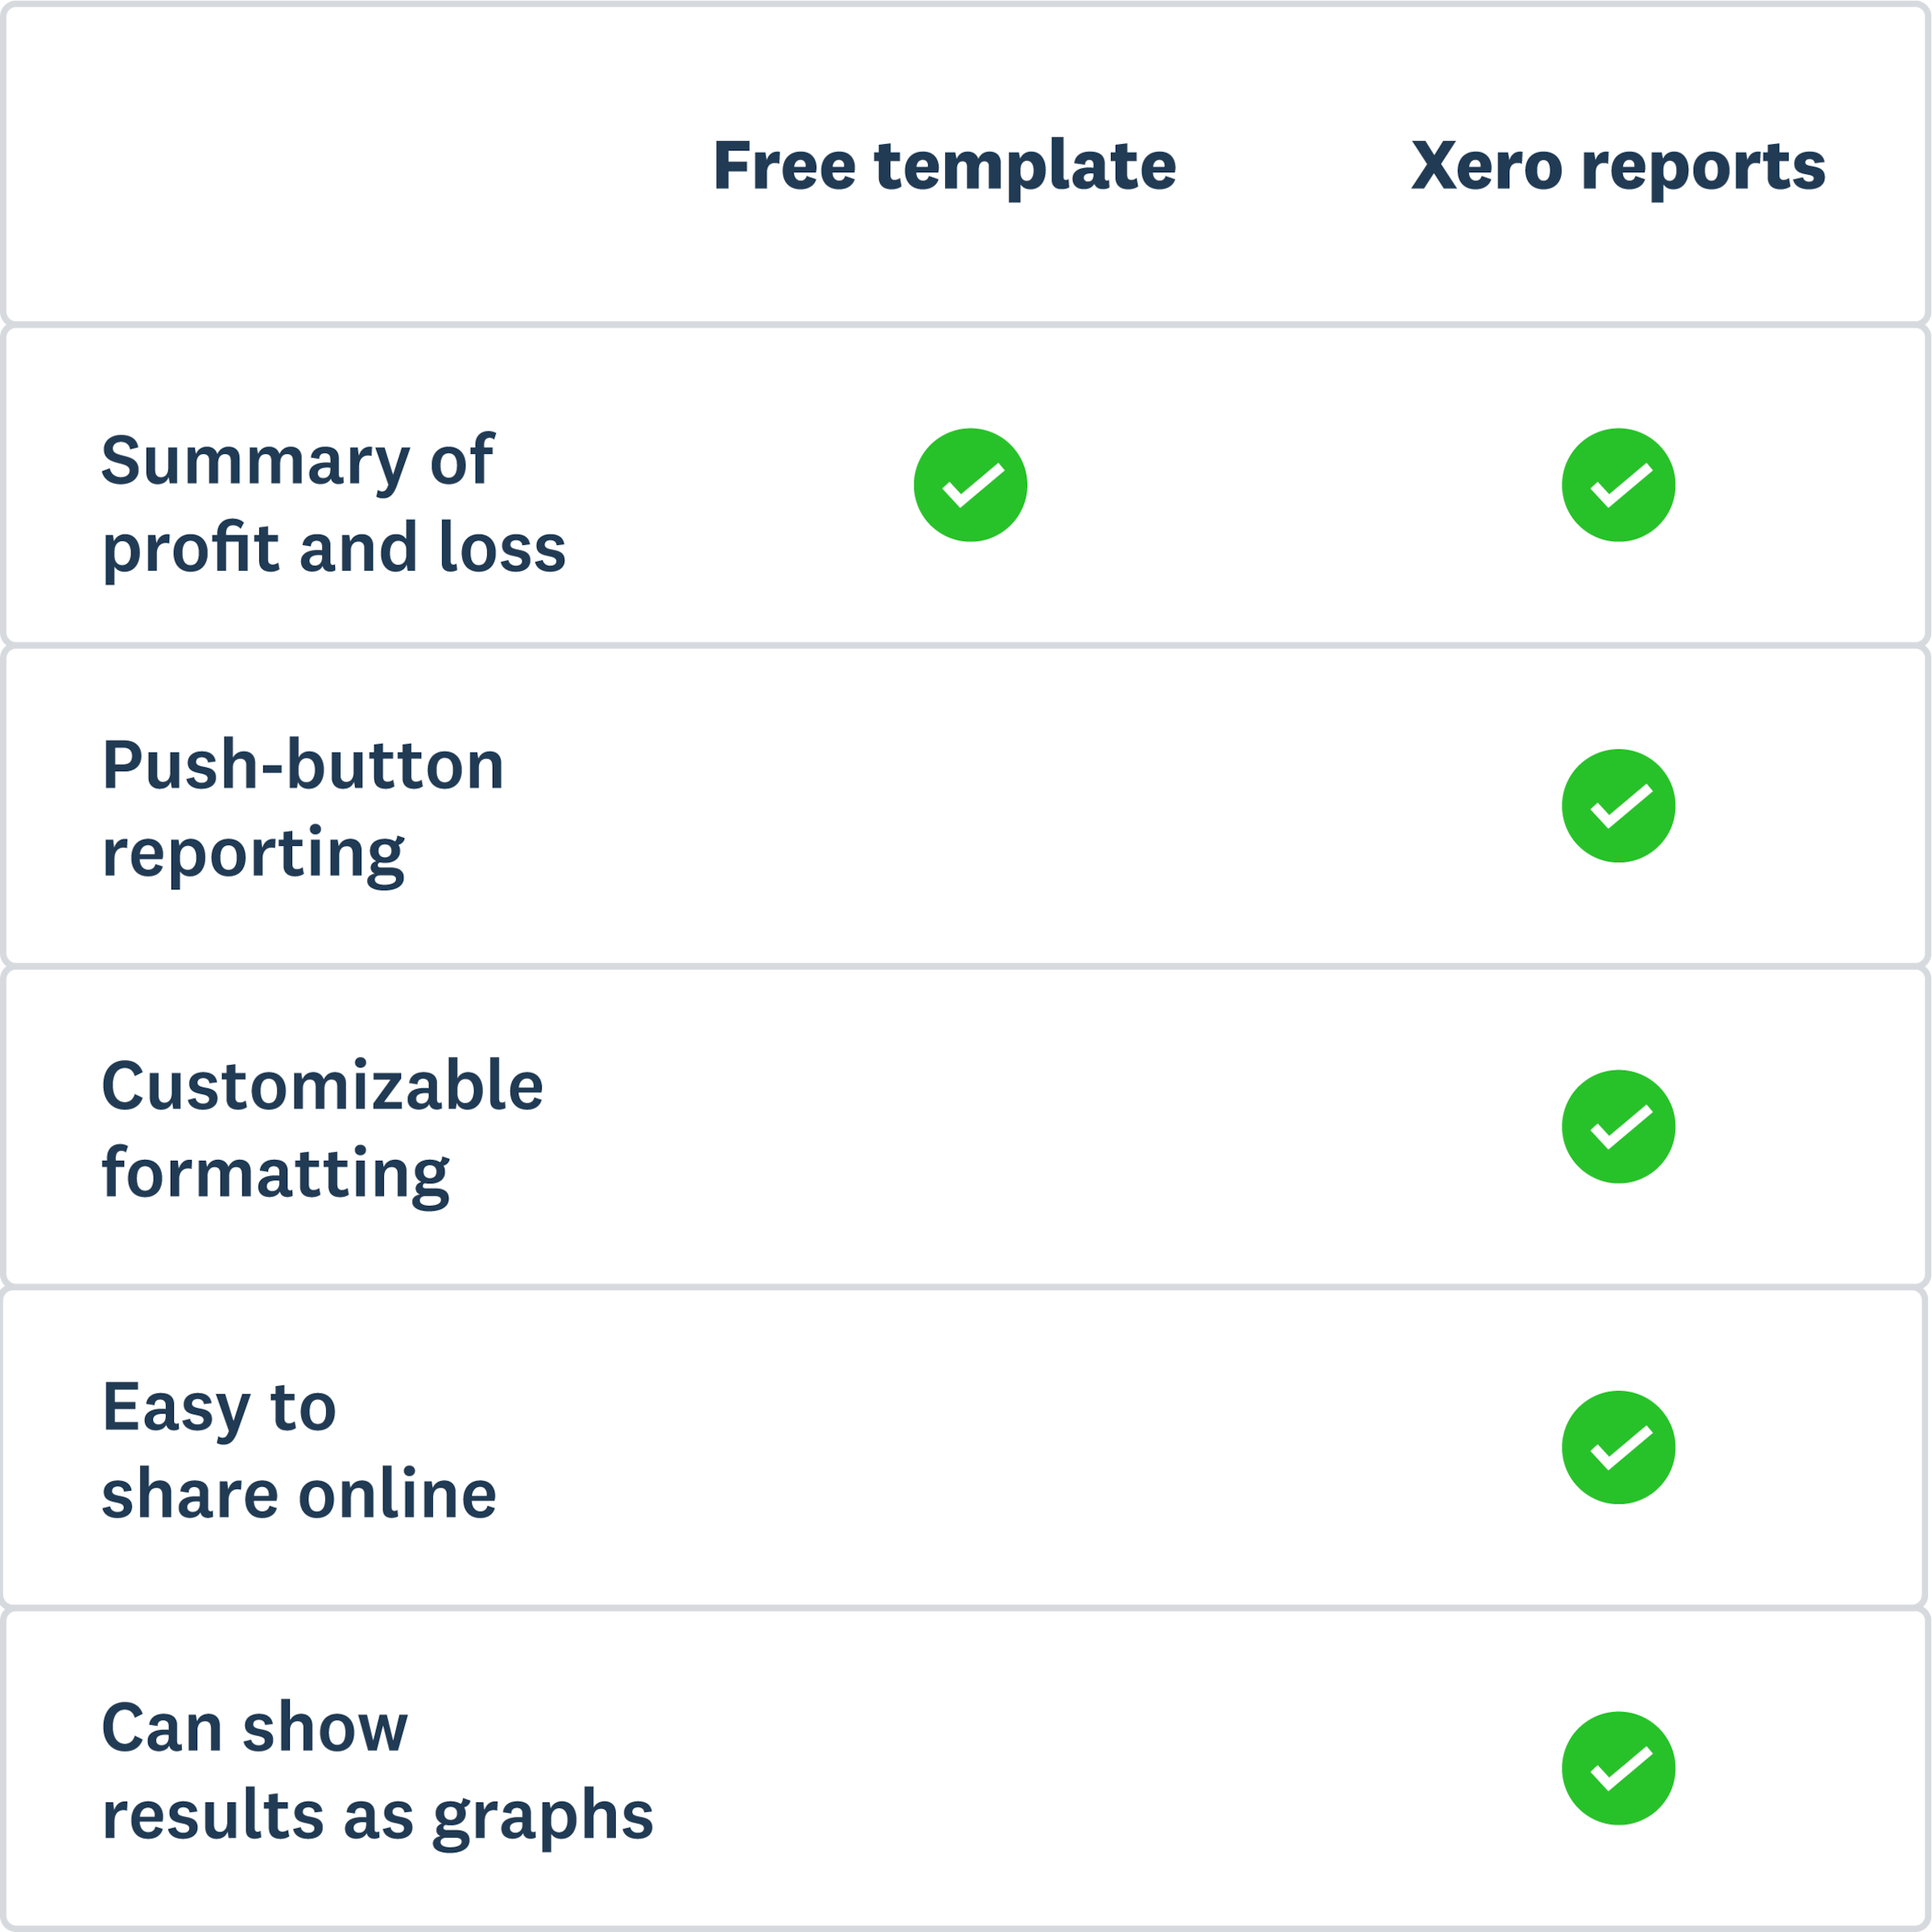 Table shows Xero gives push-button reporting, customizable formats, online sharing, and can visualize results. 